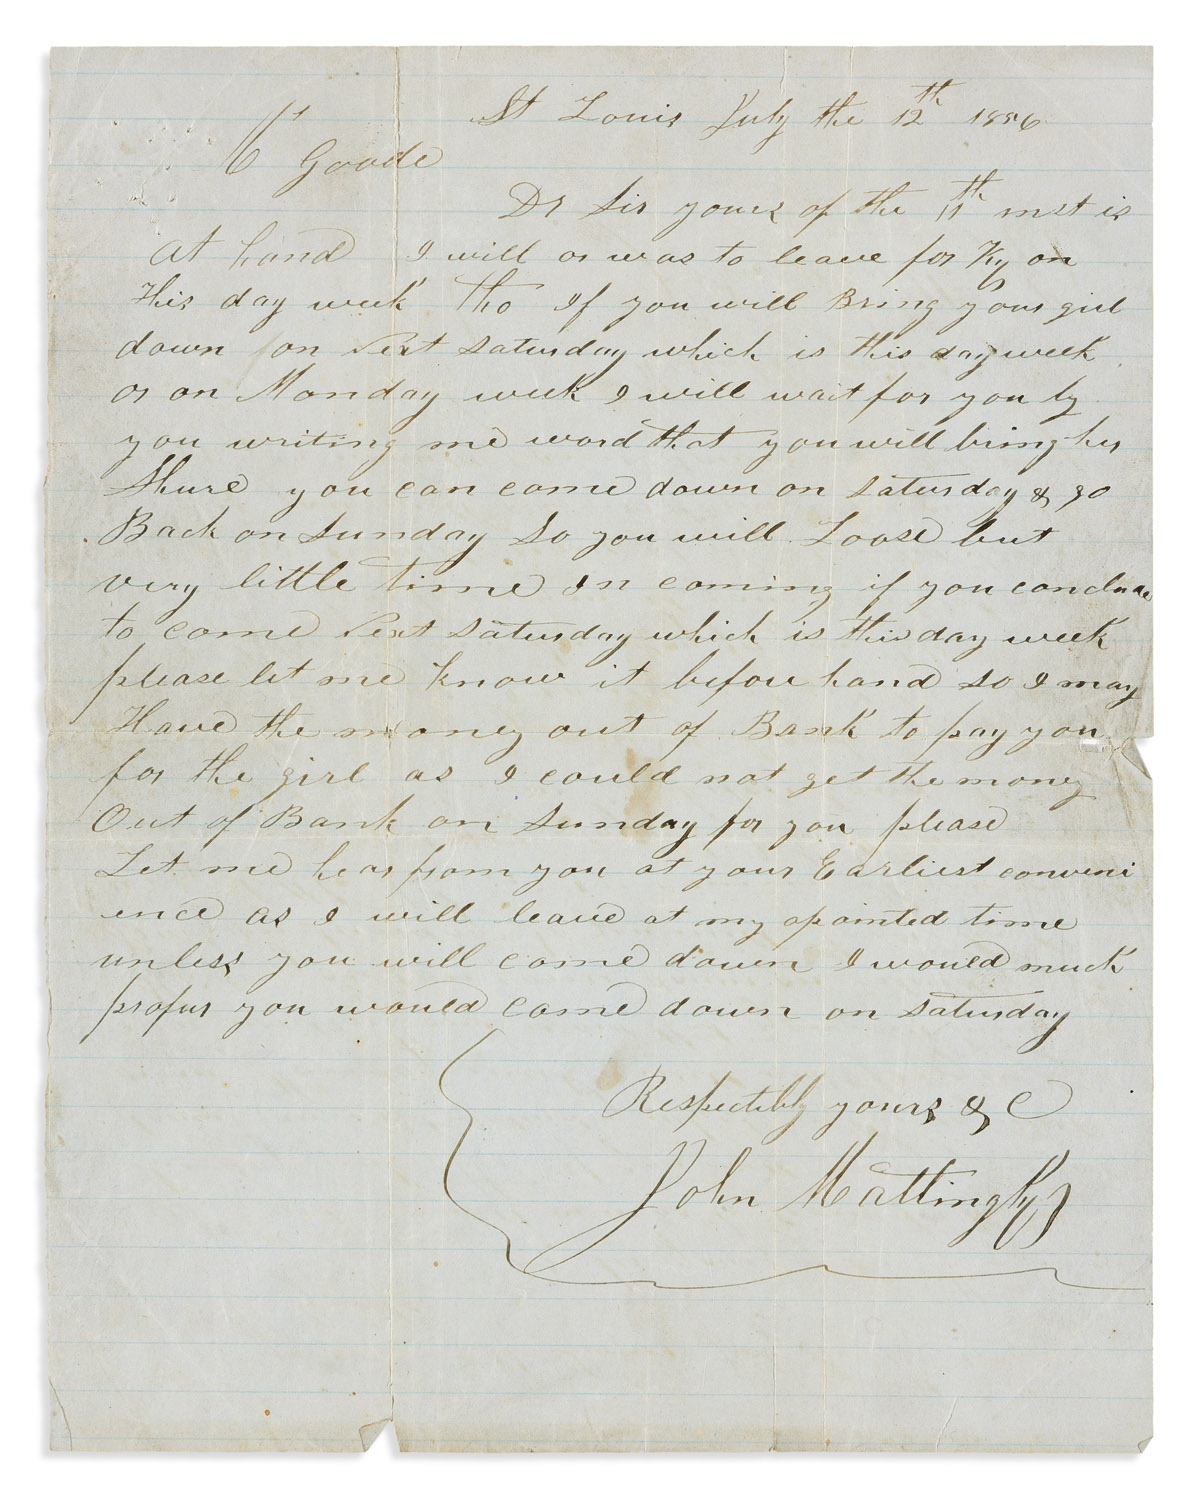 (SLAVERY & ABOLITION.) John Mattingly. Letter from a slave trader regarding the purchase of a girl.